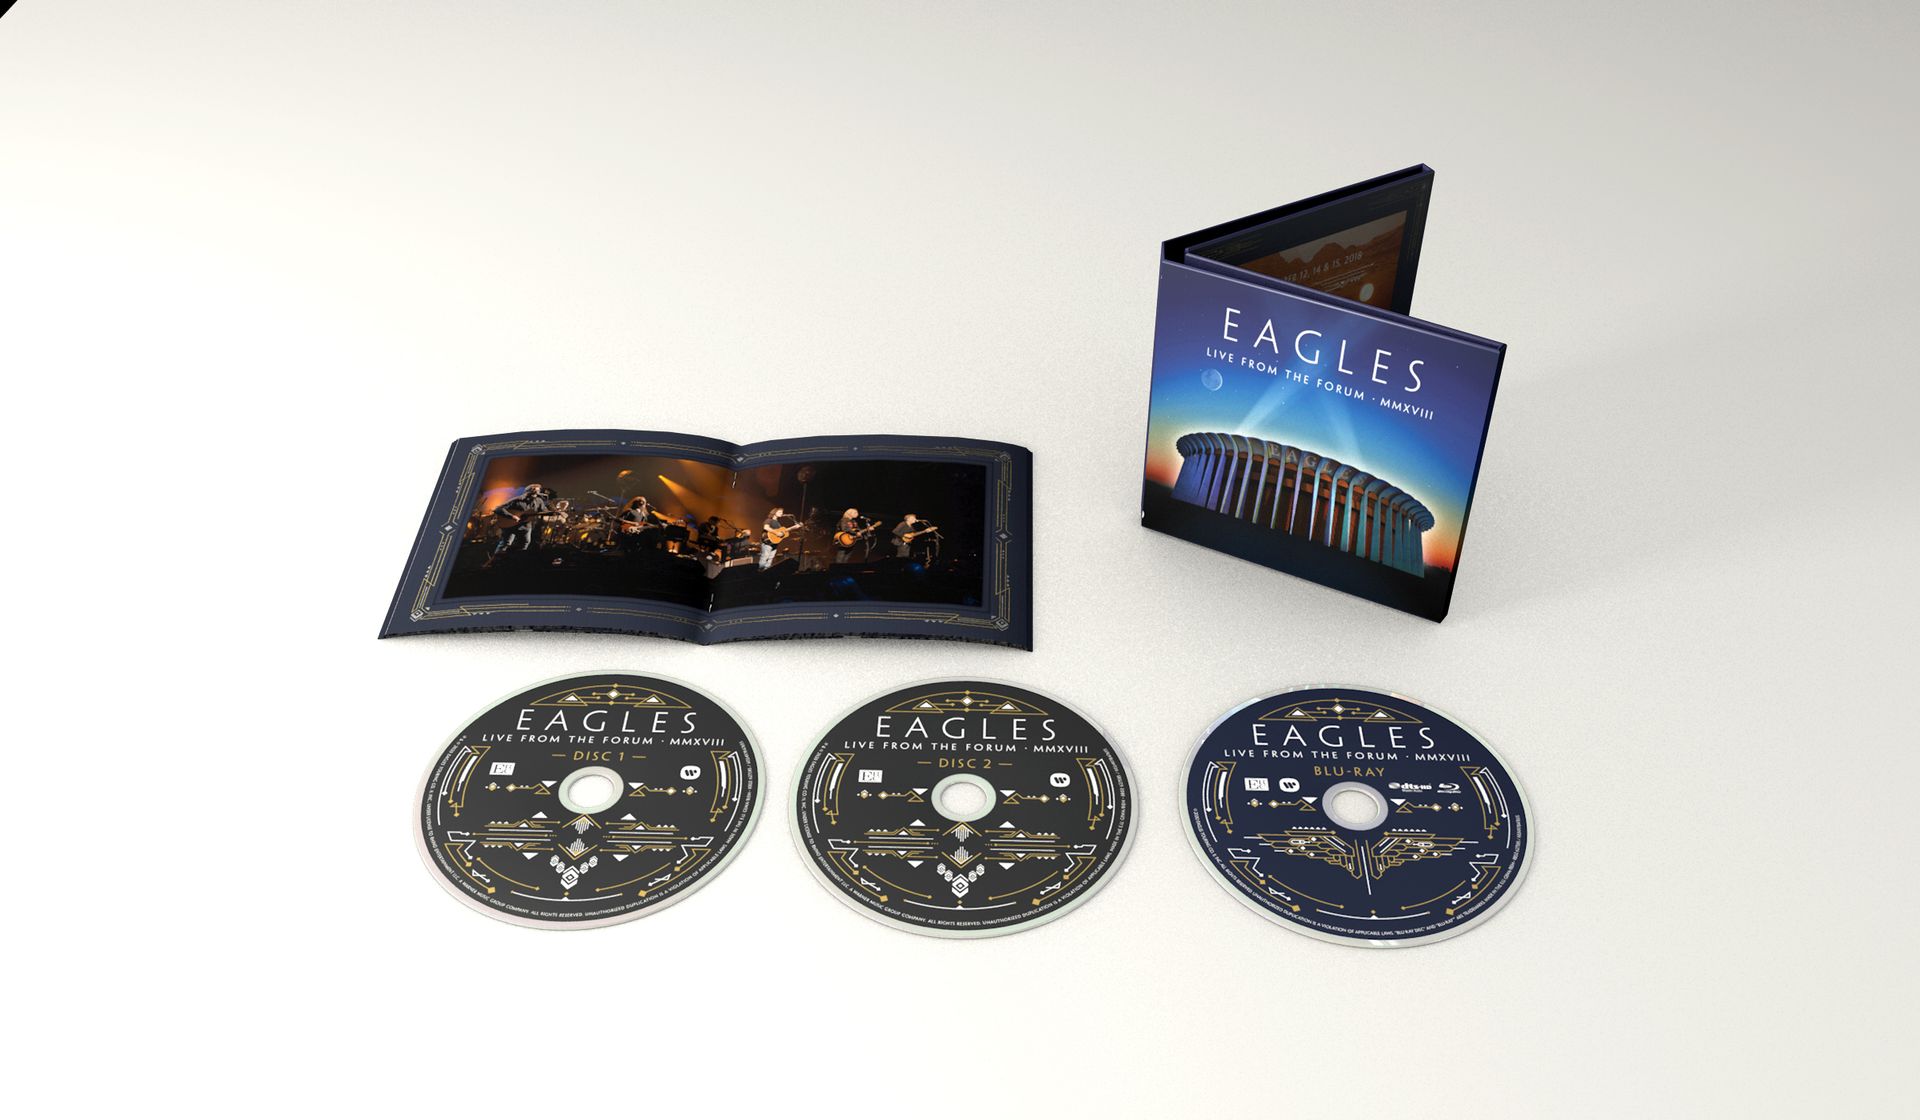 Les Eagles sortent l'album "LIVE FROM THE FORUM MMXVIII"